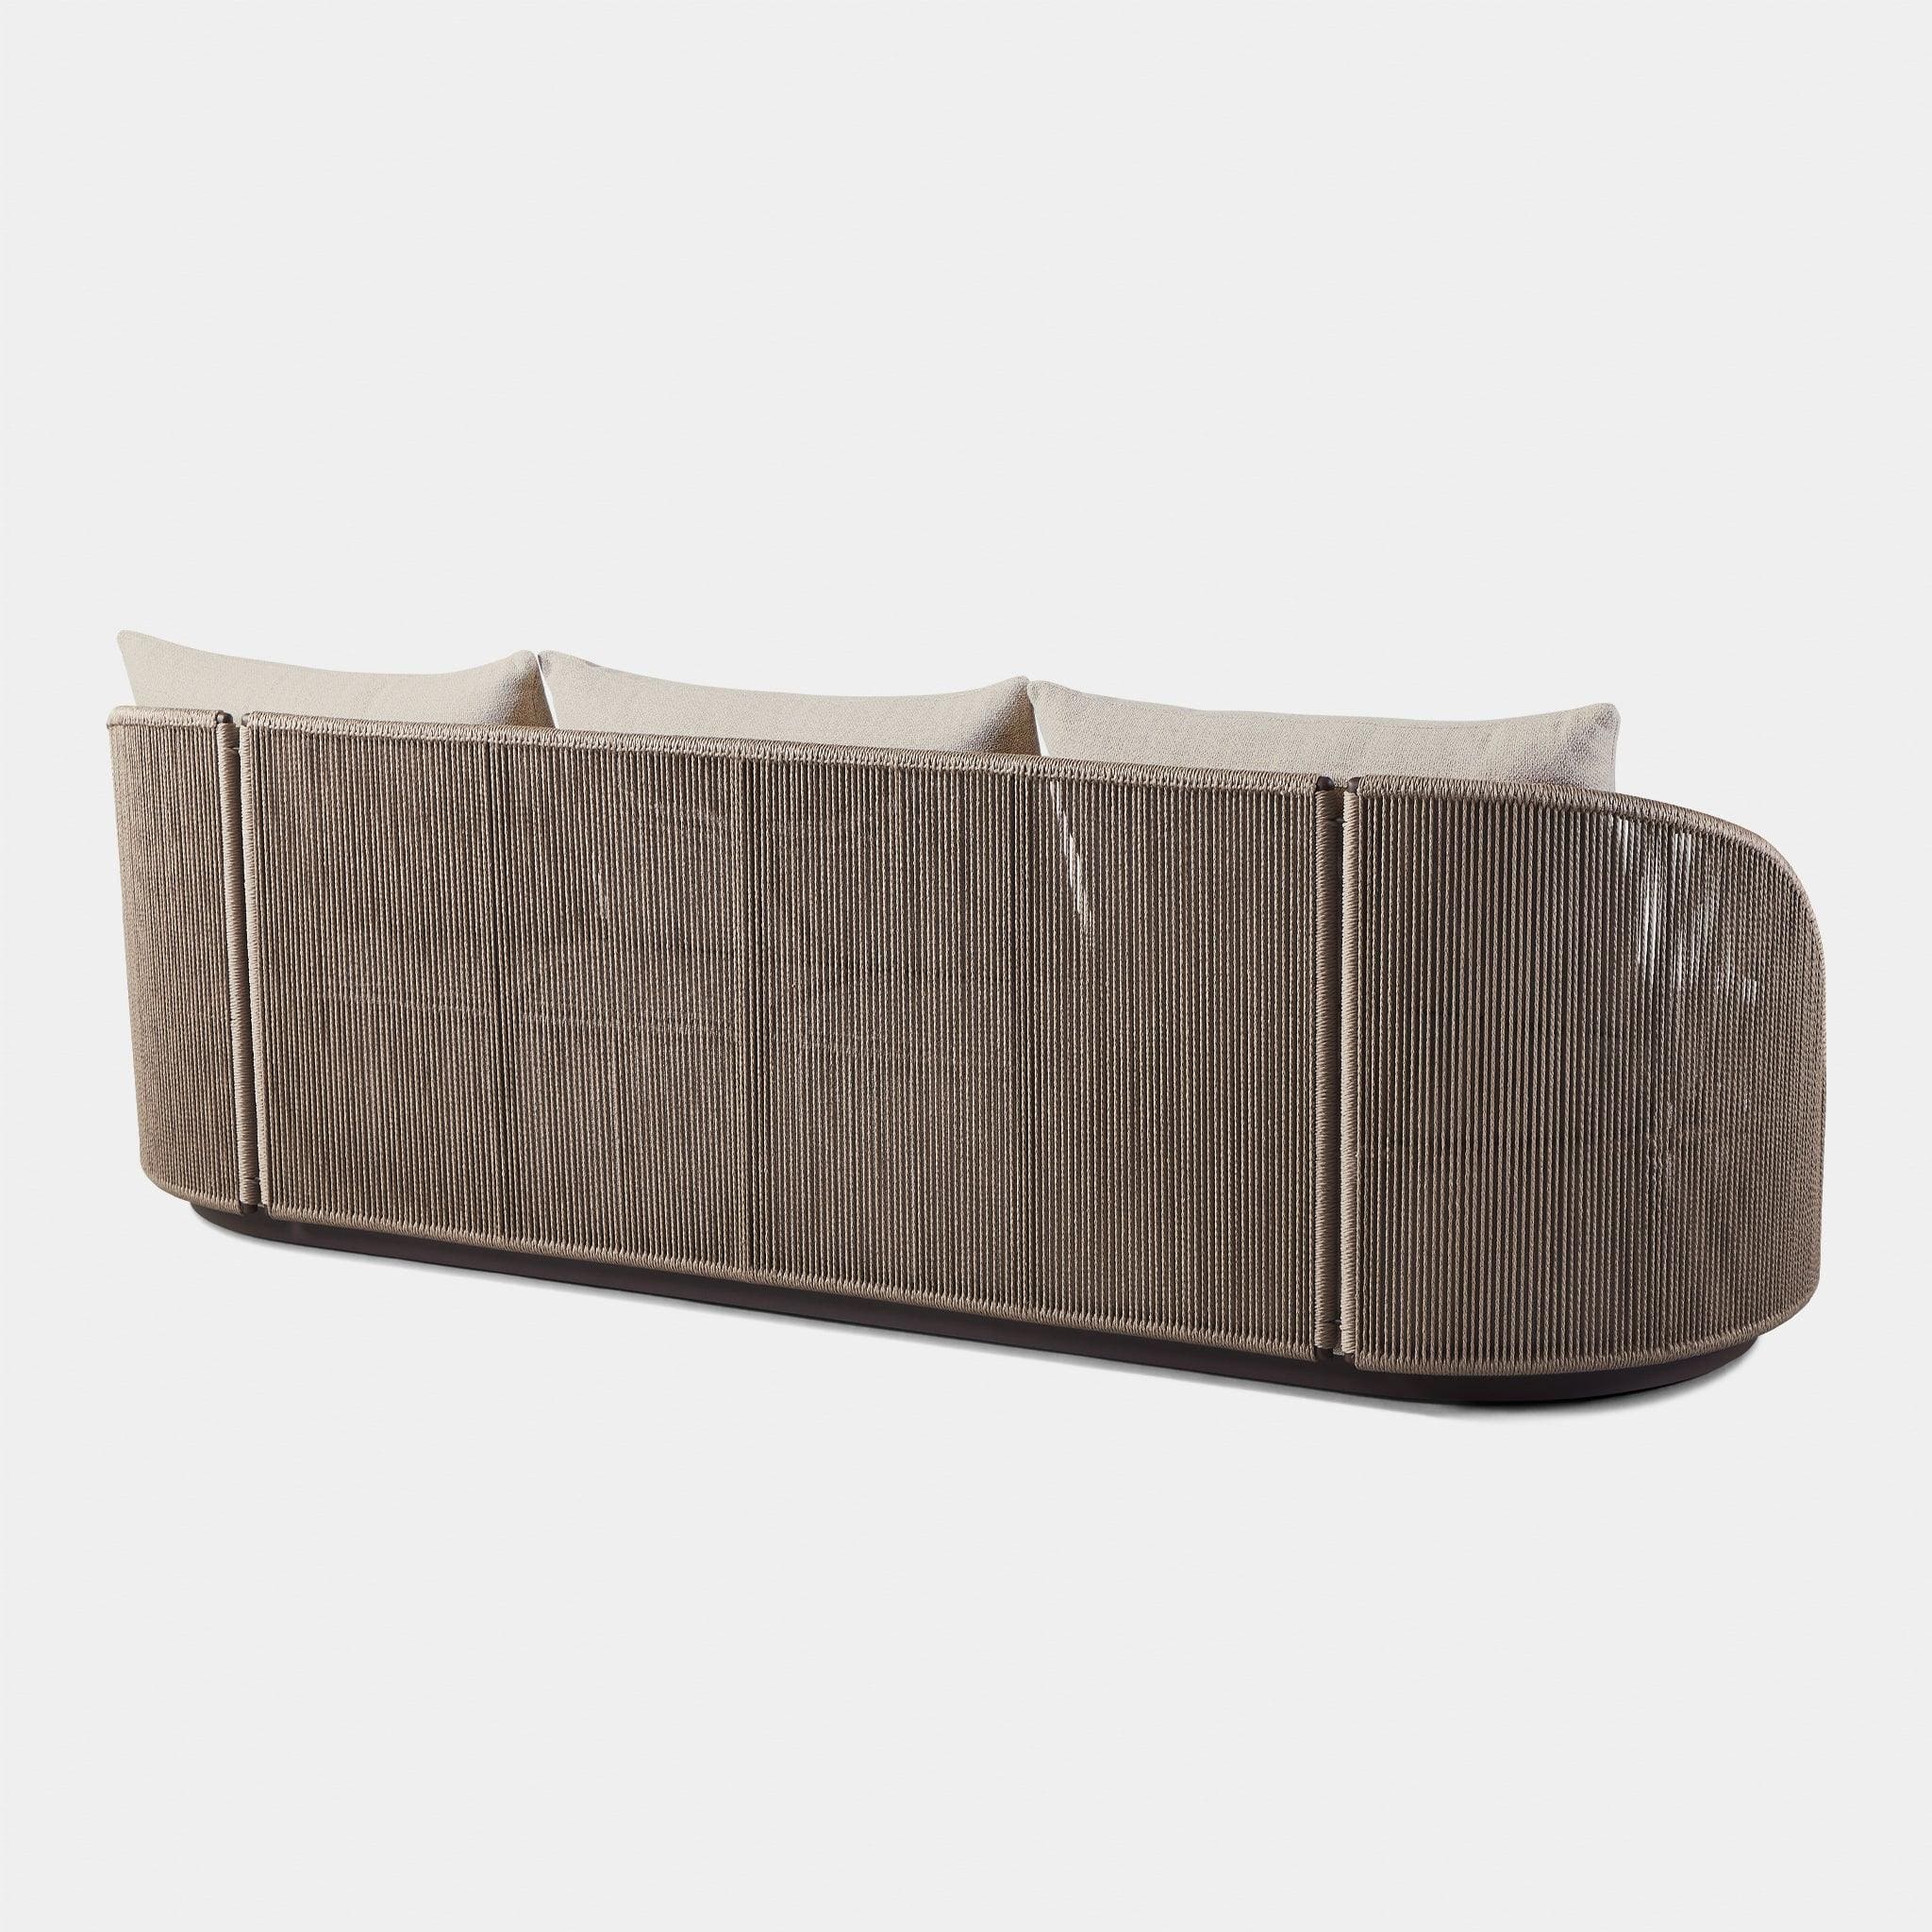 Boxhill's Milan Outdoor 3 Seat Sofa back view